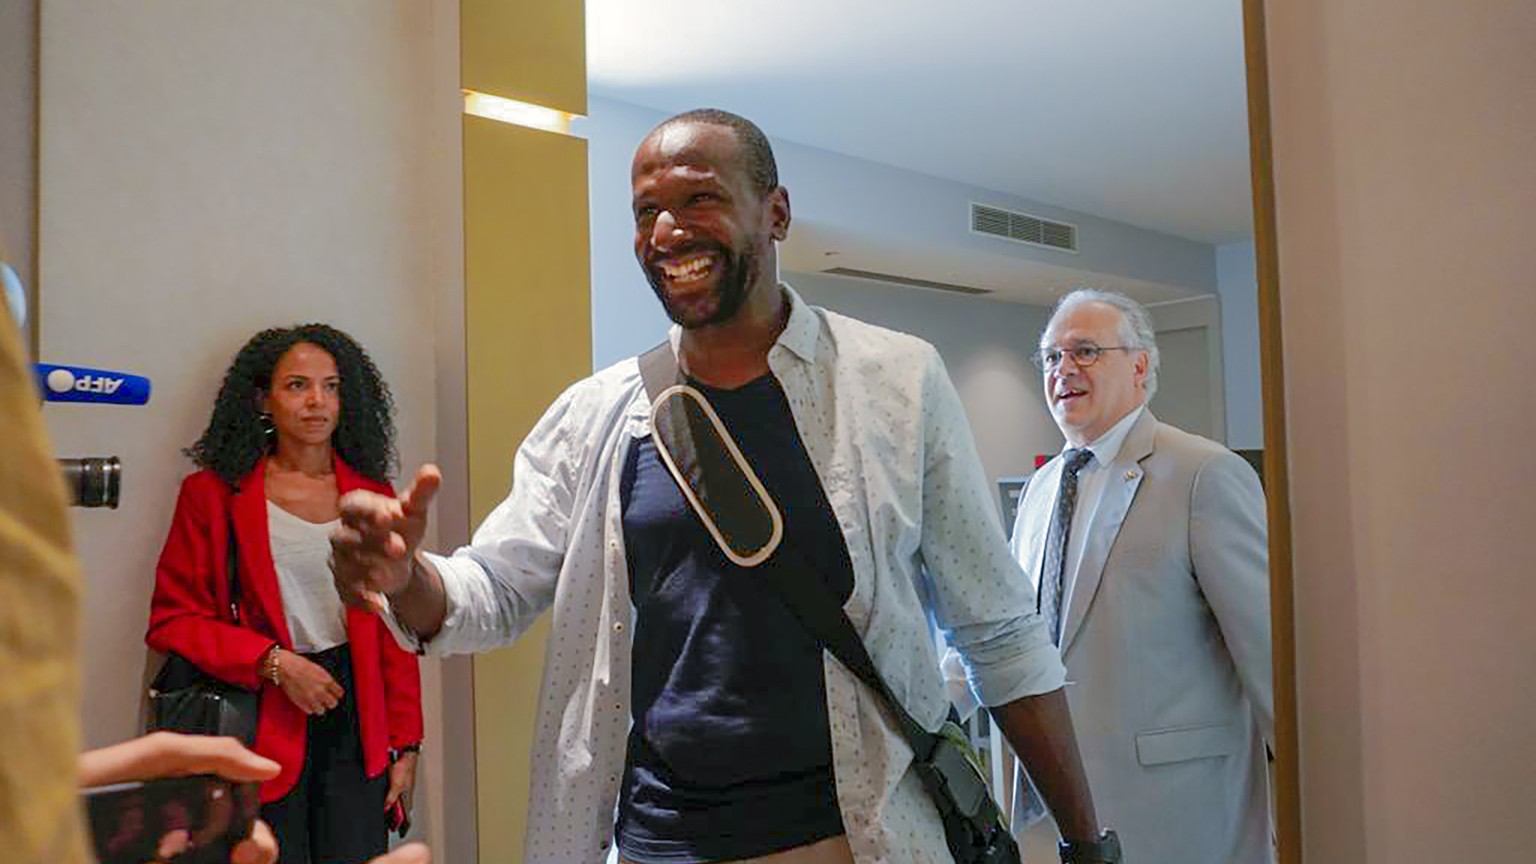 French journalist Olivier Dubois arrives at the VIP lounge at the airport in Niamey, Niger, Monday March 20, 2023. Dubois, who was abducted almost two years ago, was released alongside American aid wo ...